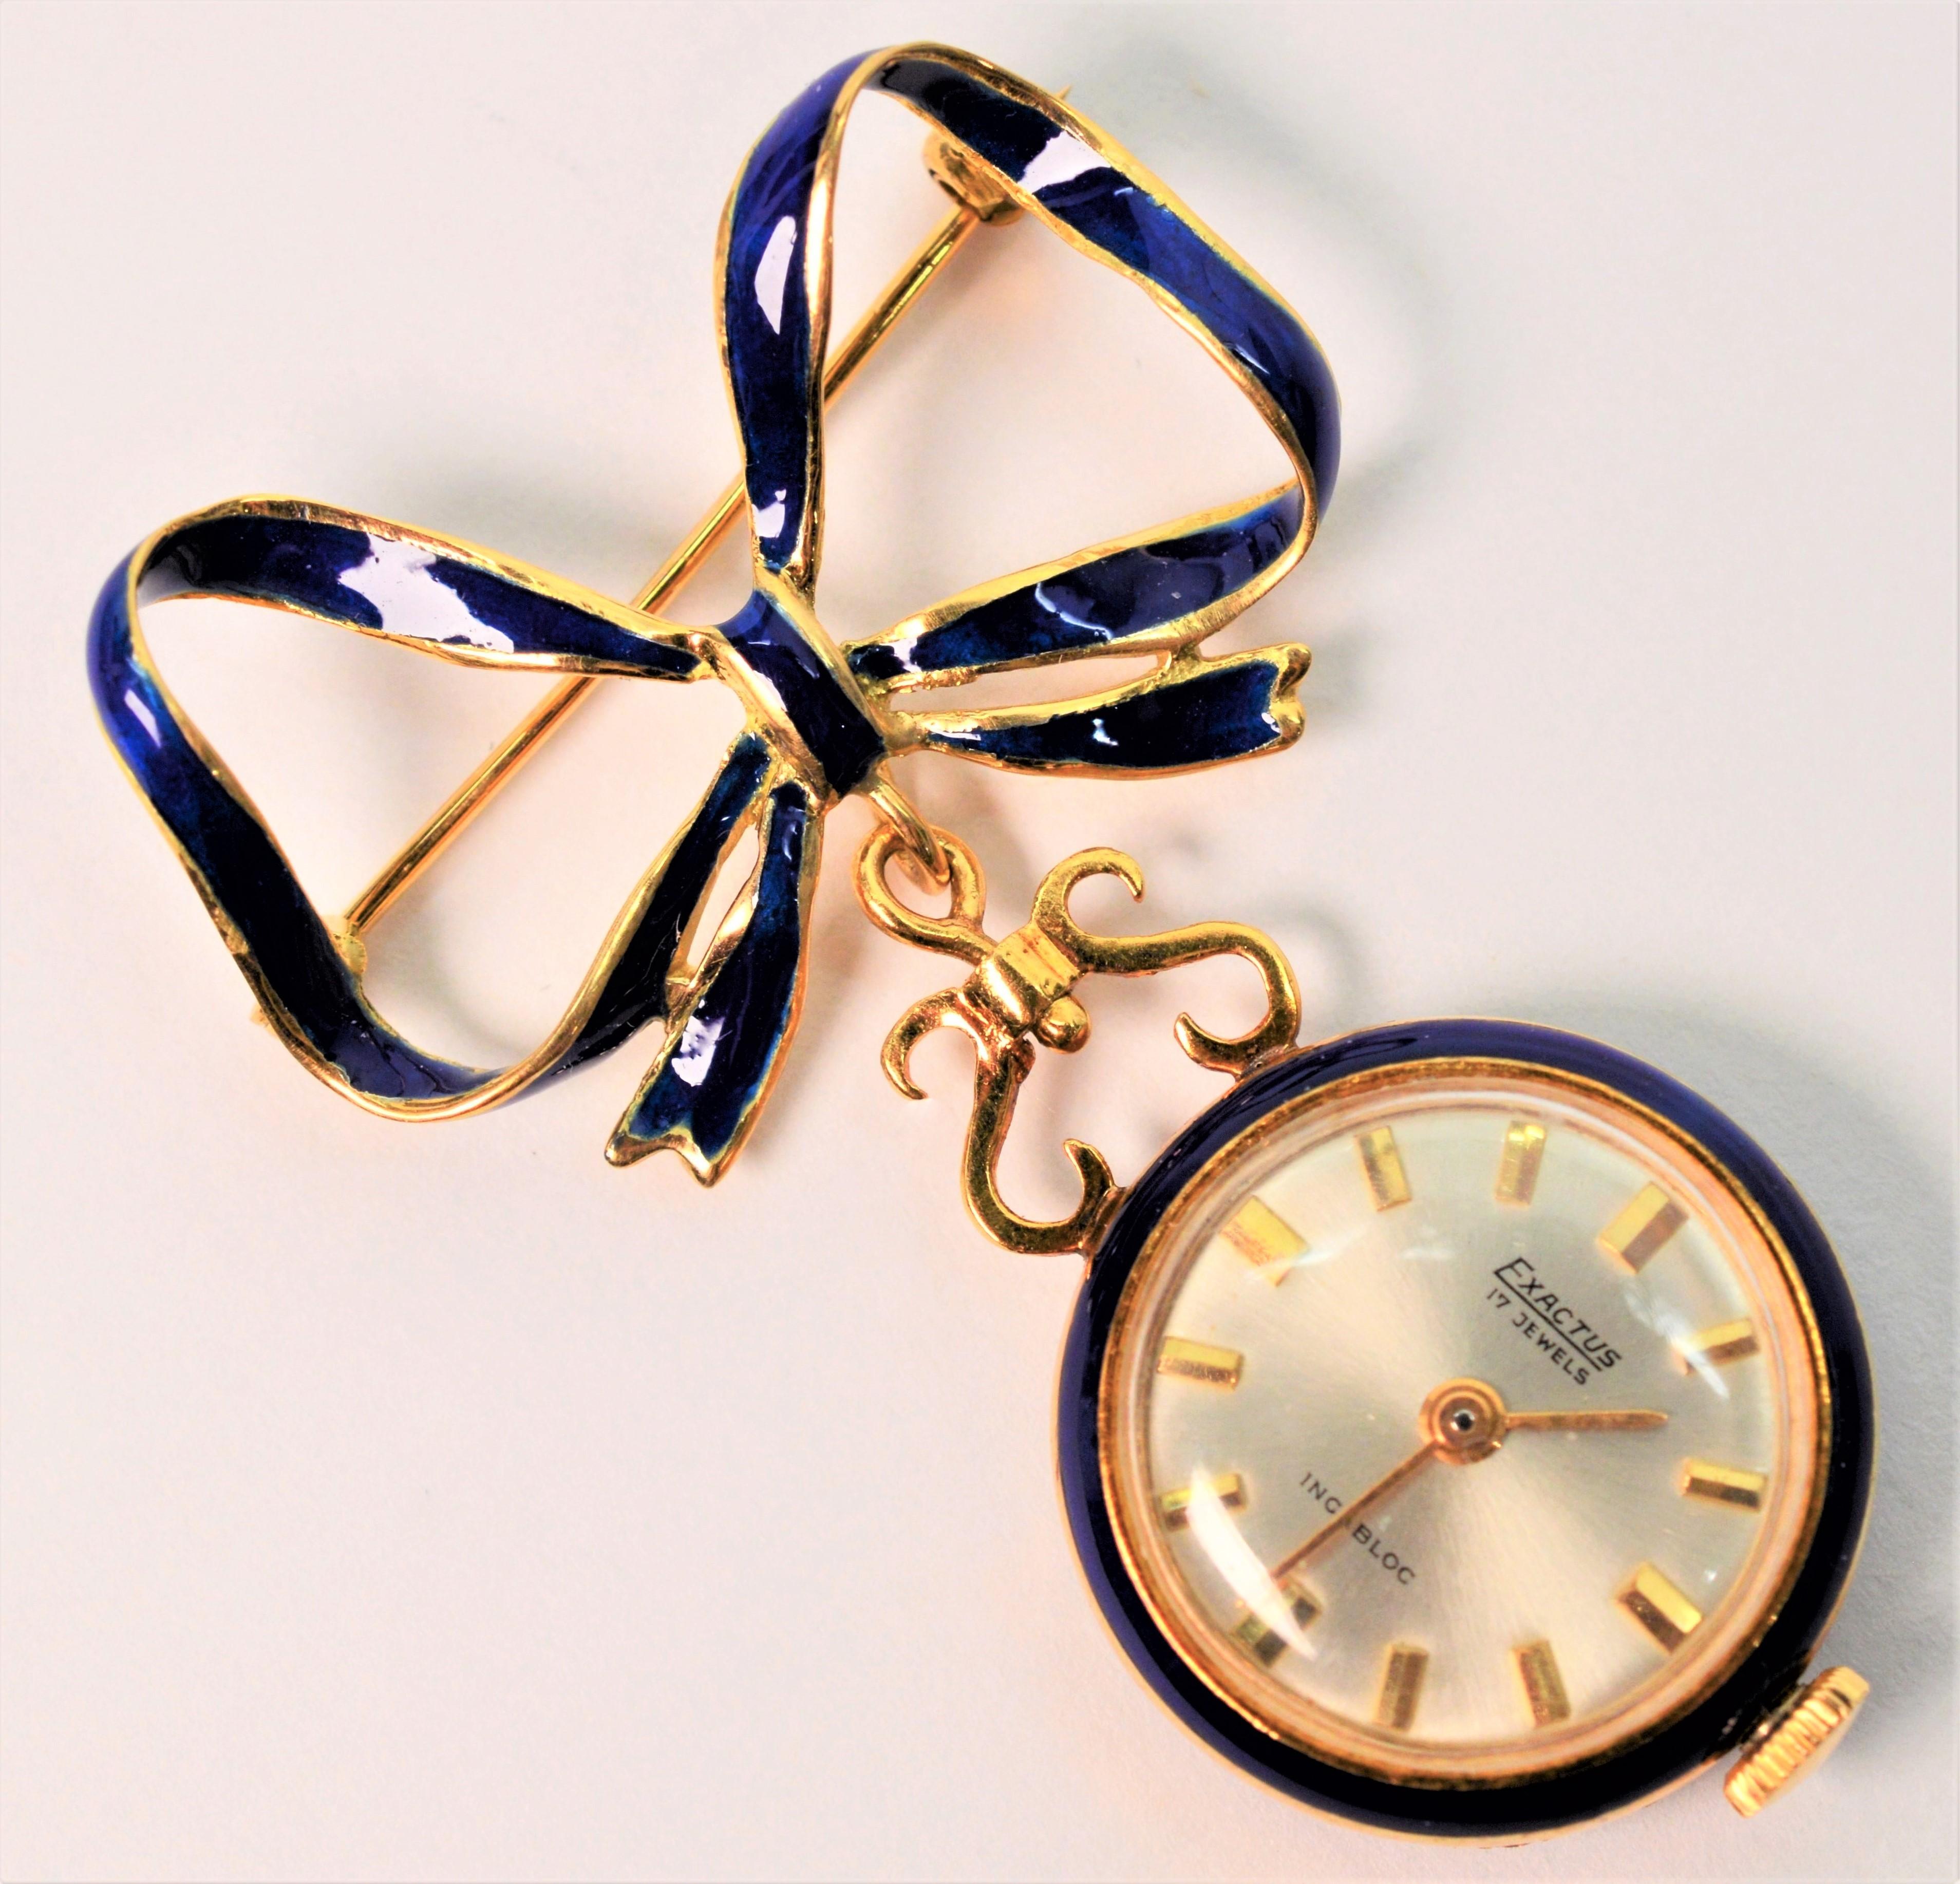 Charmingly romantic, this Italian made brooch starts with a delicately tied bow crafted of fourteen karat yellow gold with a center ribbon of cobalt blue enamel. Affixed with a fancy gold watch hanger is a round 20.72mm (3/4 inch)  Exactus J560 